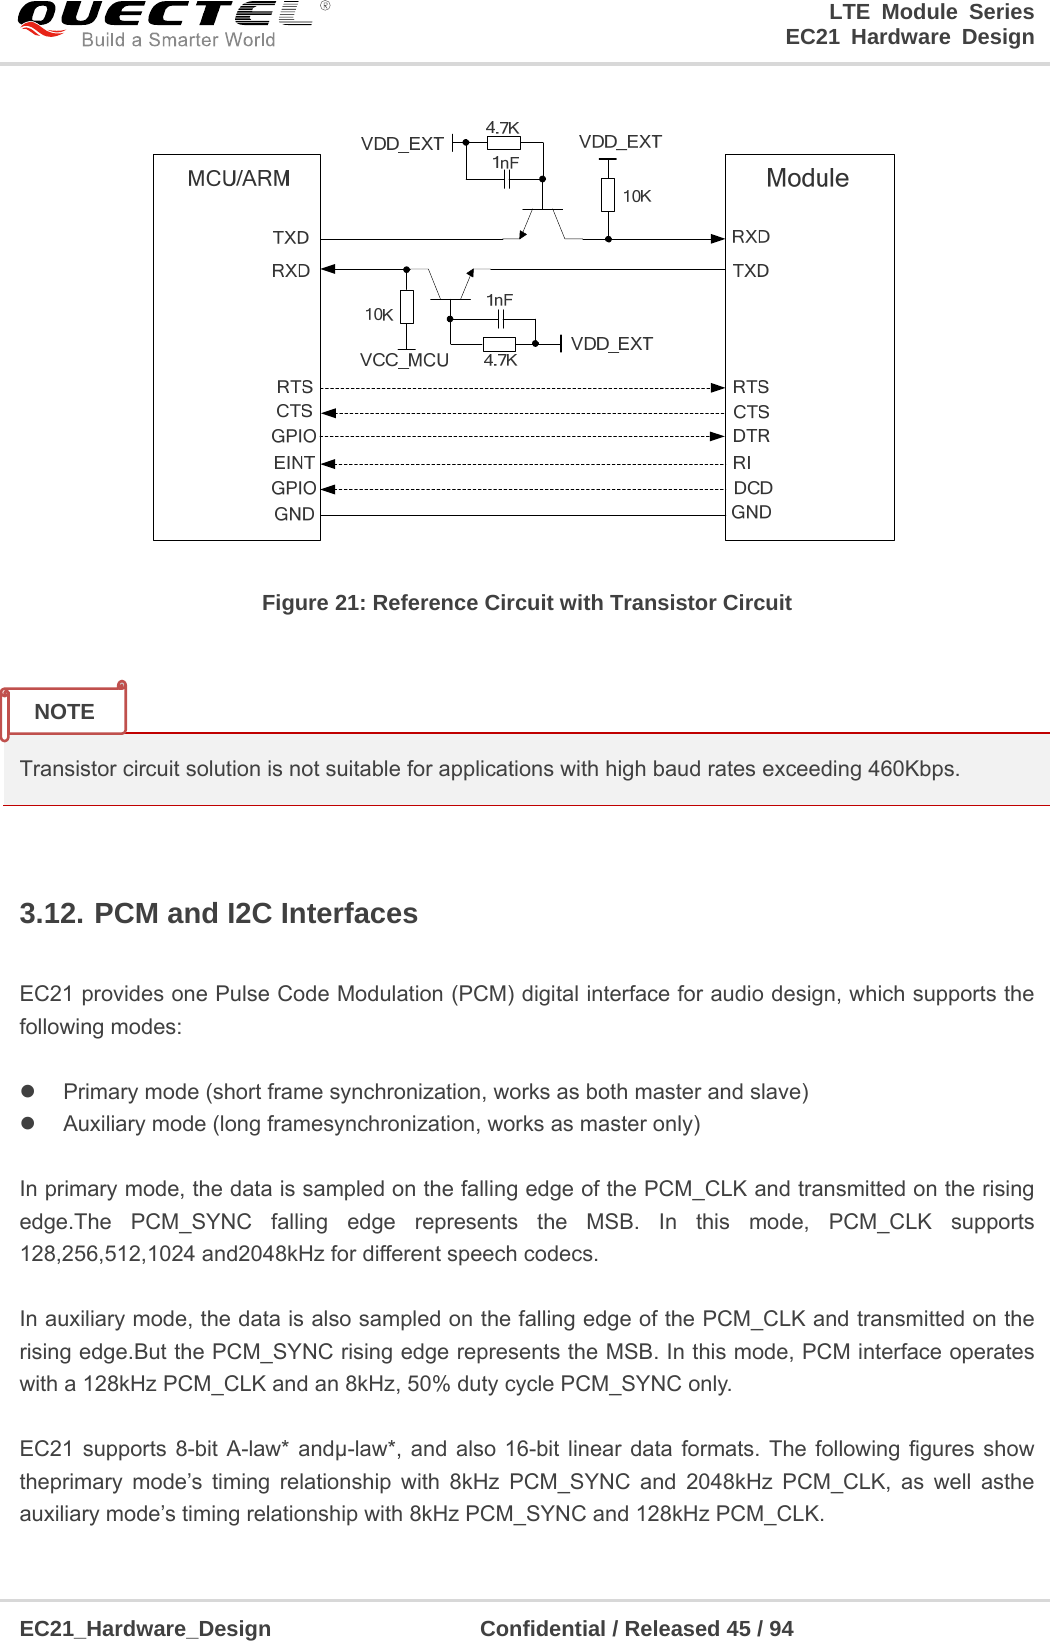 LTE Module Series                                                                 EC21 Hardware Design  EC21_Hardware_Design                   Confidential / Released 45 / 94     Figure 21: Reference Circuit with Transistor Circuit   Transistor circuit solution is not suitable for applications with high baud rates exceeding 460Kbps.  3.12. PCM and I2C Interfaces  EC21 provides one Pulse Code Modulation (PCM) digital interface for audio design, which supports the following modes:    Primary mode (short frame synchronization, works as both master and slave)   Auxiliary mode (long framesynchronization, works as master only)  In primary mode, the data is sampled on the falling edge of the PCM_CLK and transmitted on the rising edge.The PCM_SYNC falling edge represents the MSB. In this mode, PCM_CLK supports 128,256,512,1024 and2048kHz for different speech codecs.  In auxiliary mode, the data is also sampled on the falling edge of the PCM_CLK and transmitted on the rising edge.But the PCM_SYNC rising edge represents the MSB. In this mode, PCM interface operates with a 128kHz PCM_CLK and an 8kHz, 50% duty cycle PCM_SYNC only.  EC21 supports 8-bit A-law* andμ-law*, and also 16-bit linear data formats. The following figures show theprimary mode’s timing relationship with 8kHz PCM_SYNC and 2048kHz PCM_CLK, as well asthe auxiliary mode’s timing relationship with 8kHz PCM_SYNC and 128kHz PCM_CLK. NOTE 